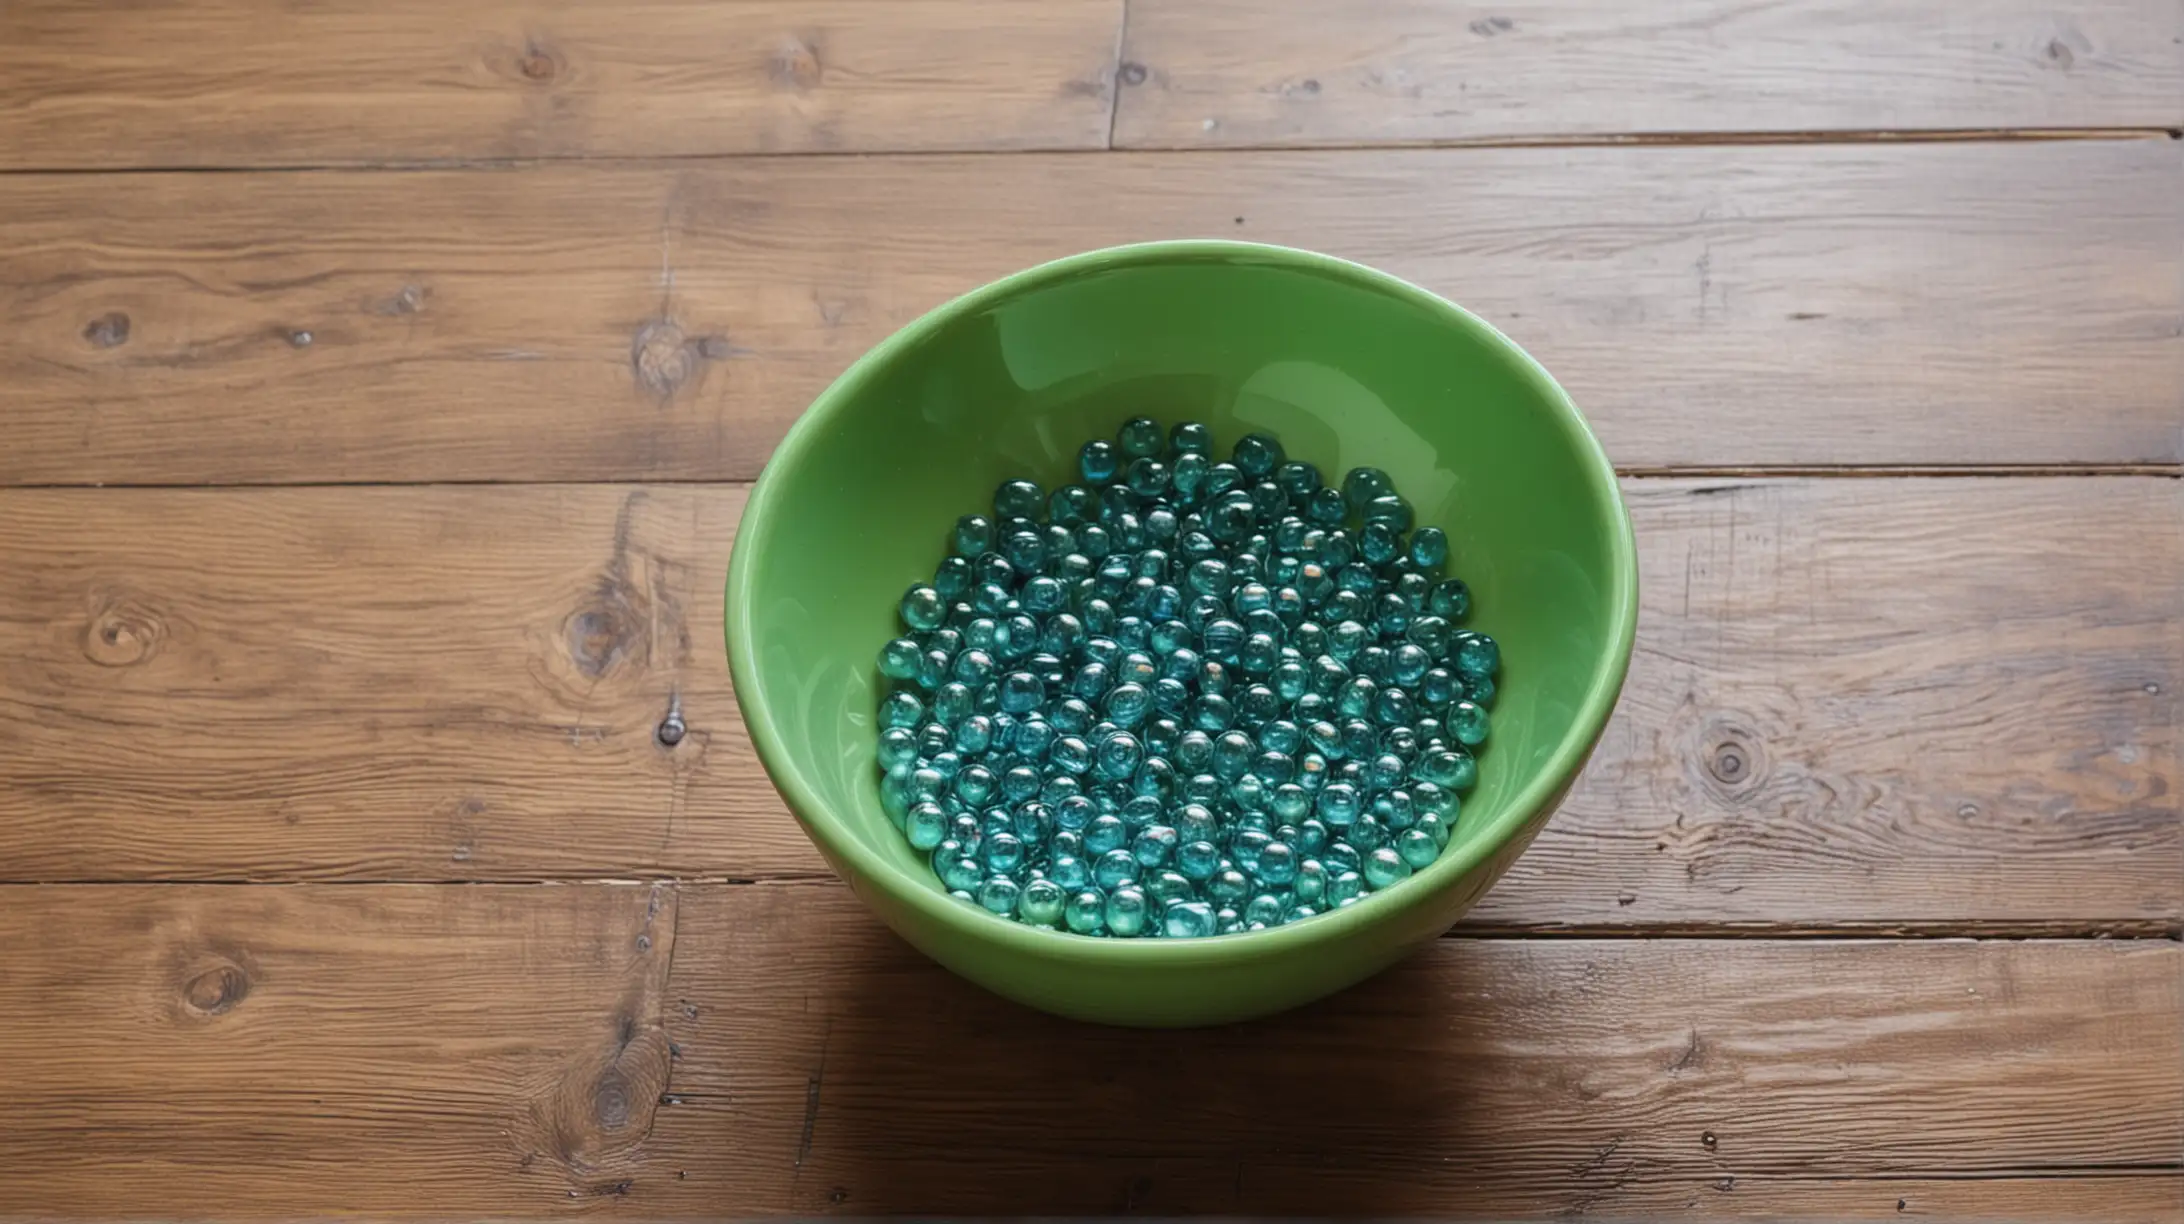 shiny green bowl with blue shiny water beads on wood floor. Close up